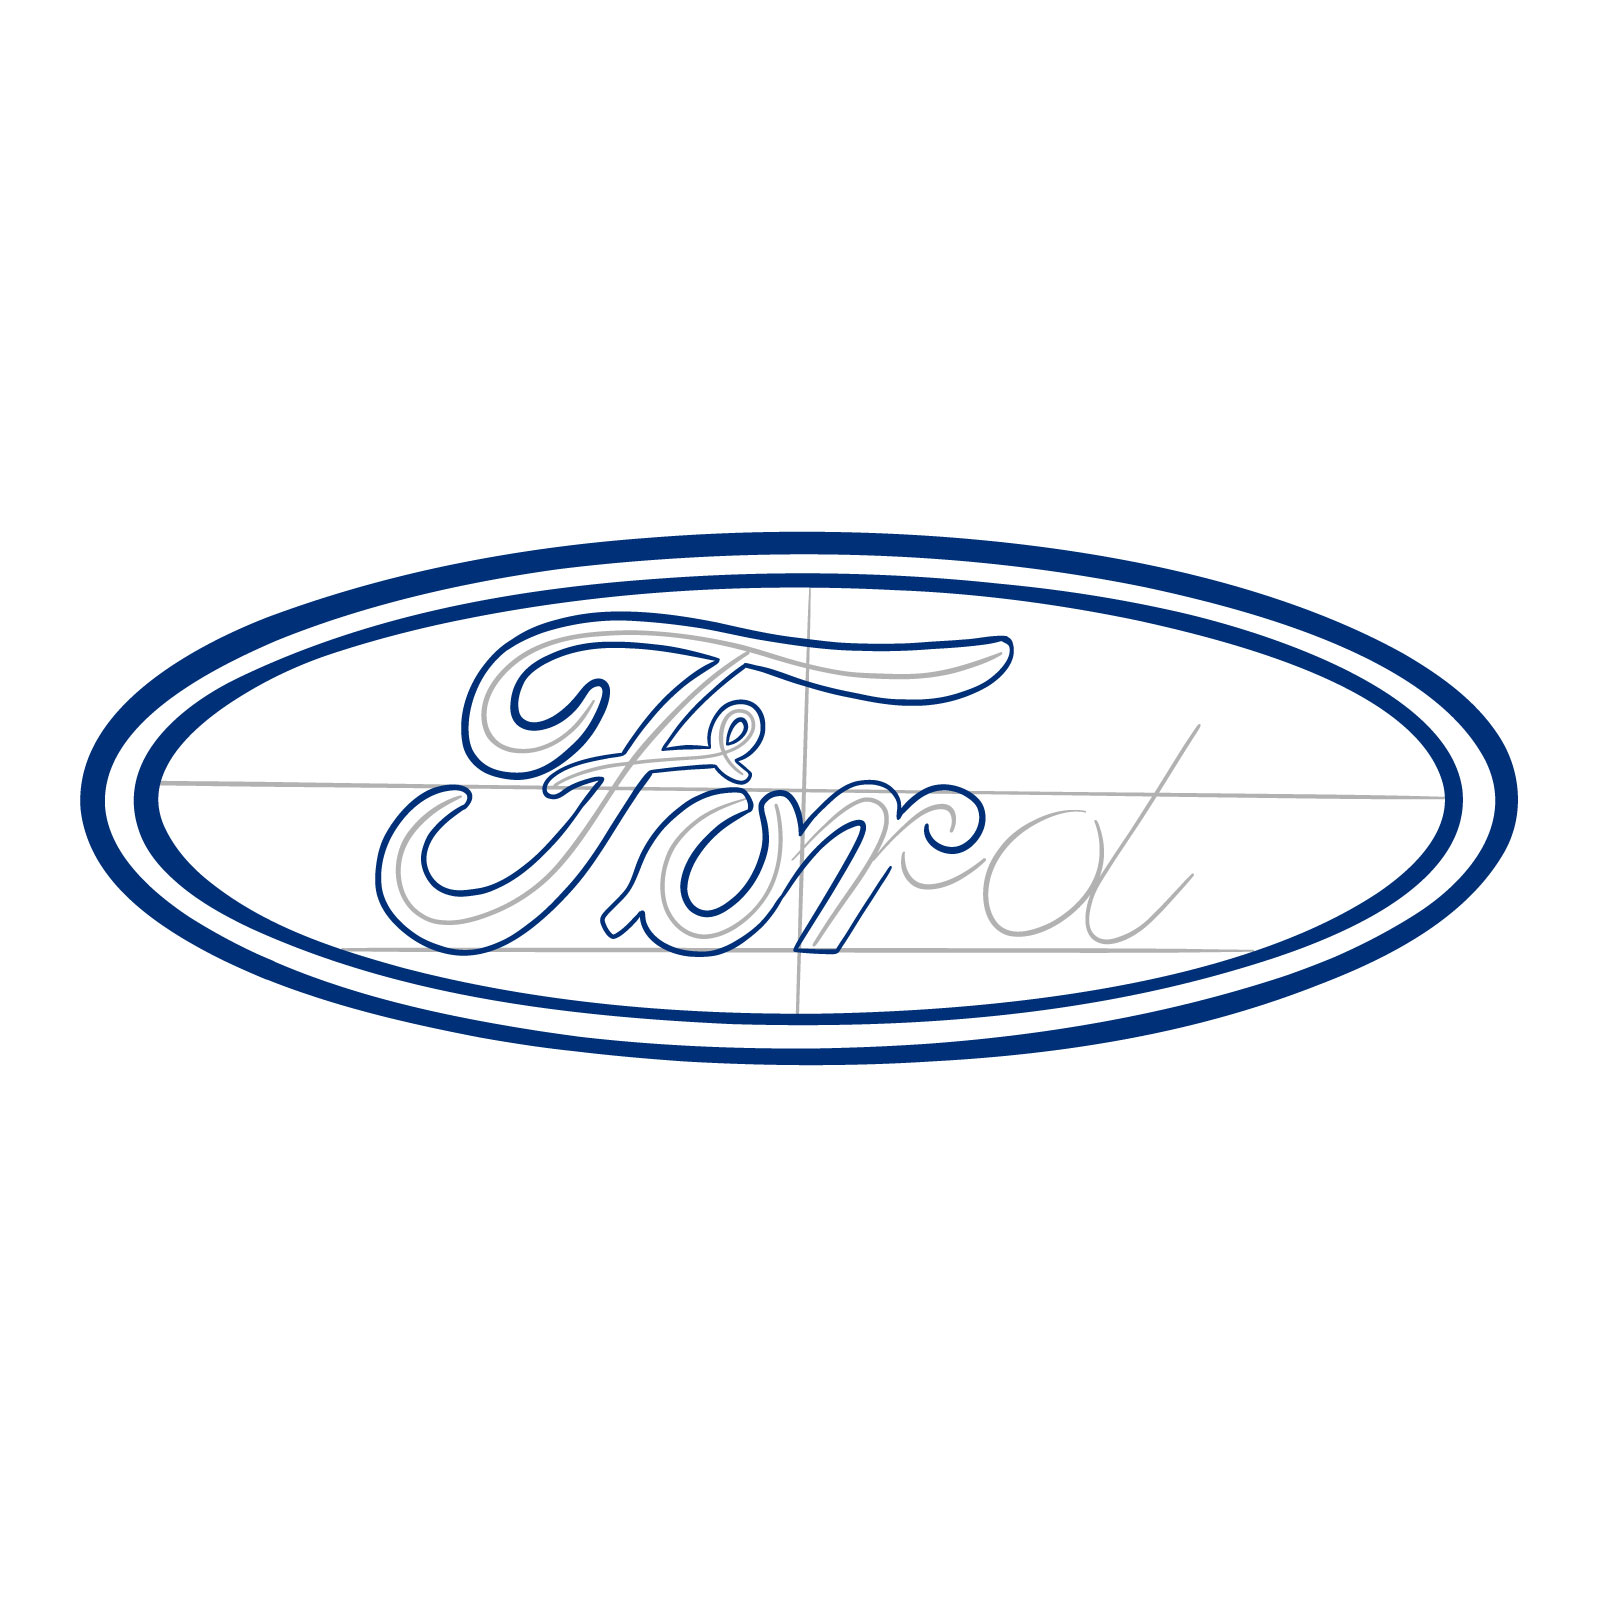 How to draw the Ford logo - step 10